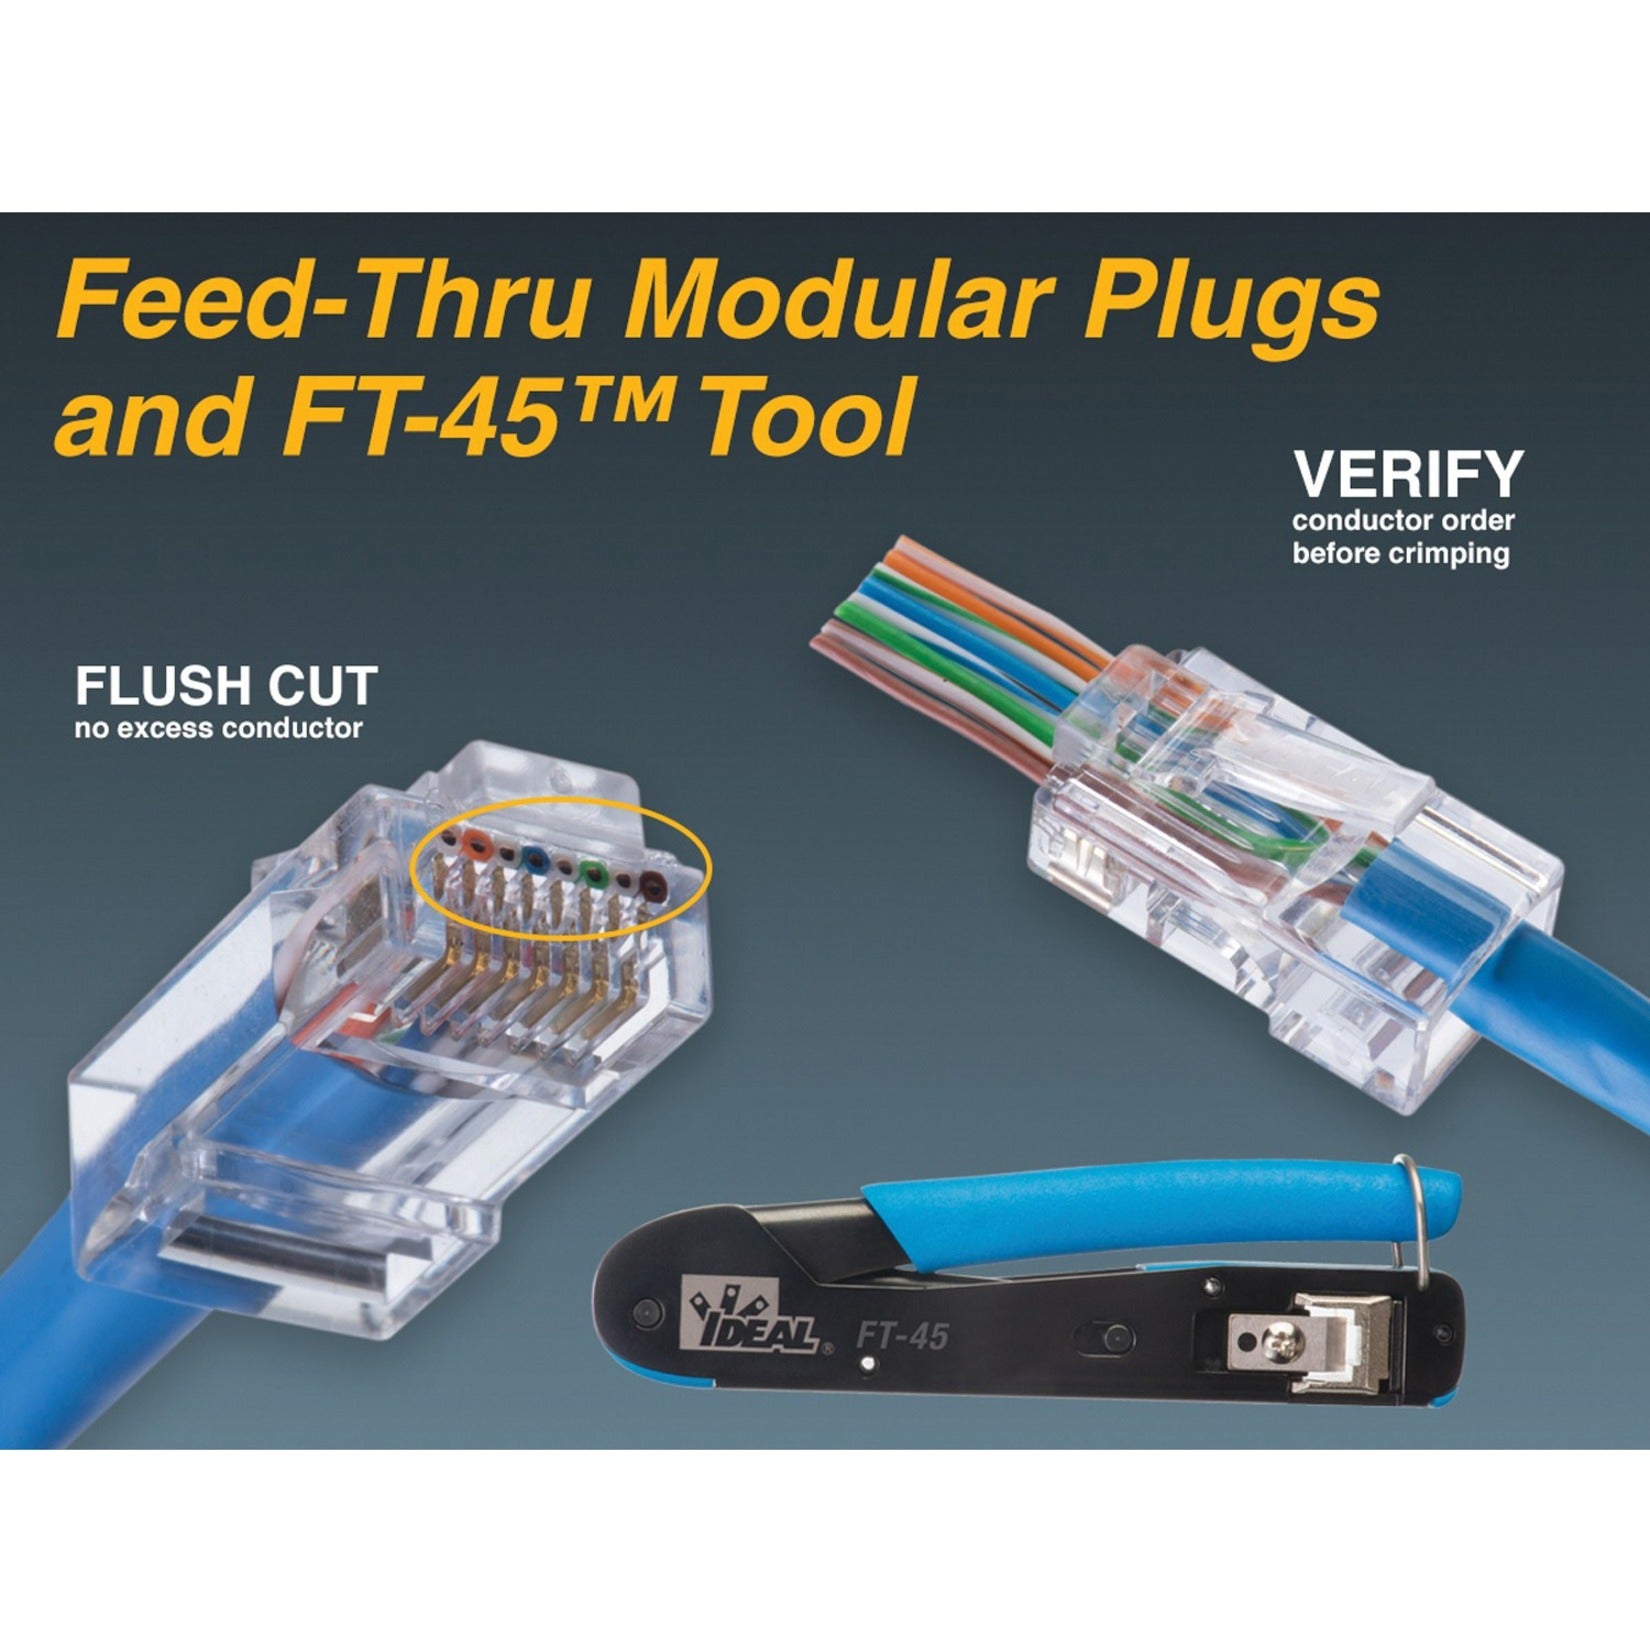 IDEAL 85-377 CAT6 Feed-Thru RJ-45 Modular Plugs 100/Bag, Network Connector with Strain Relief